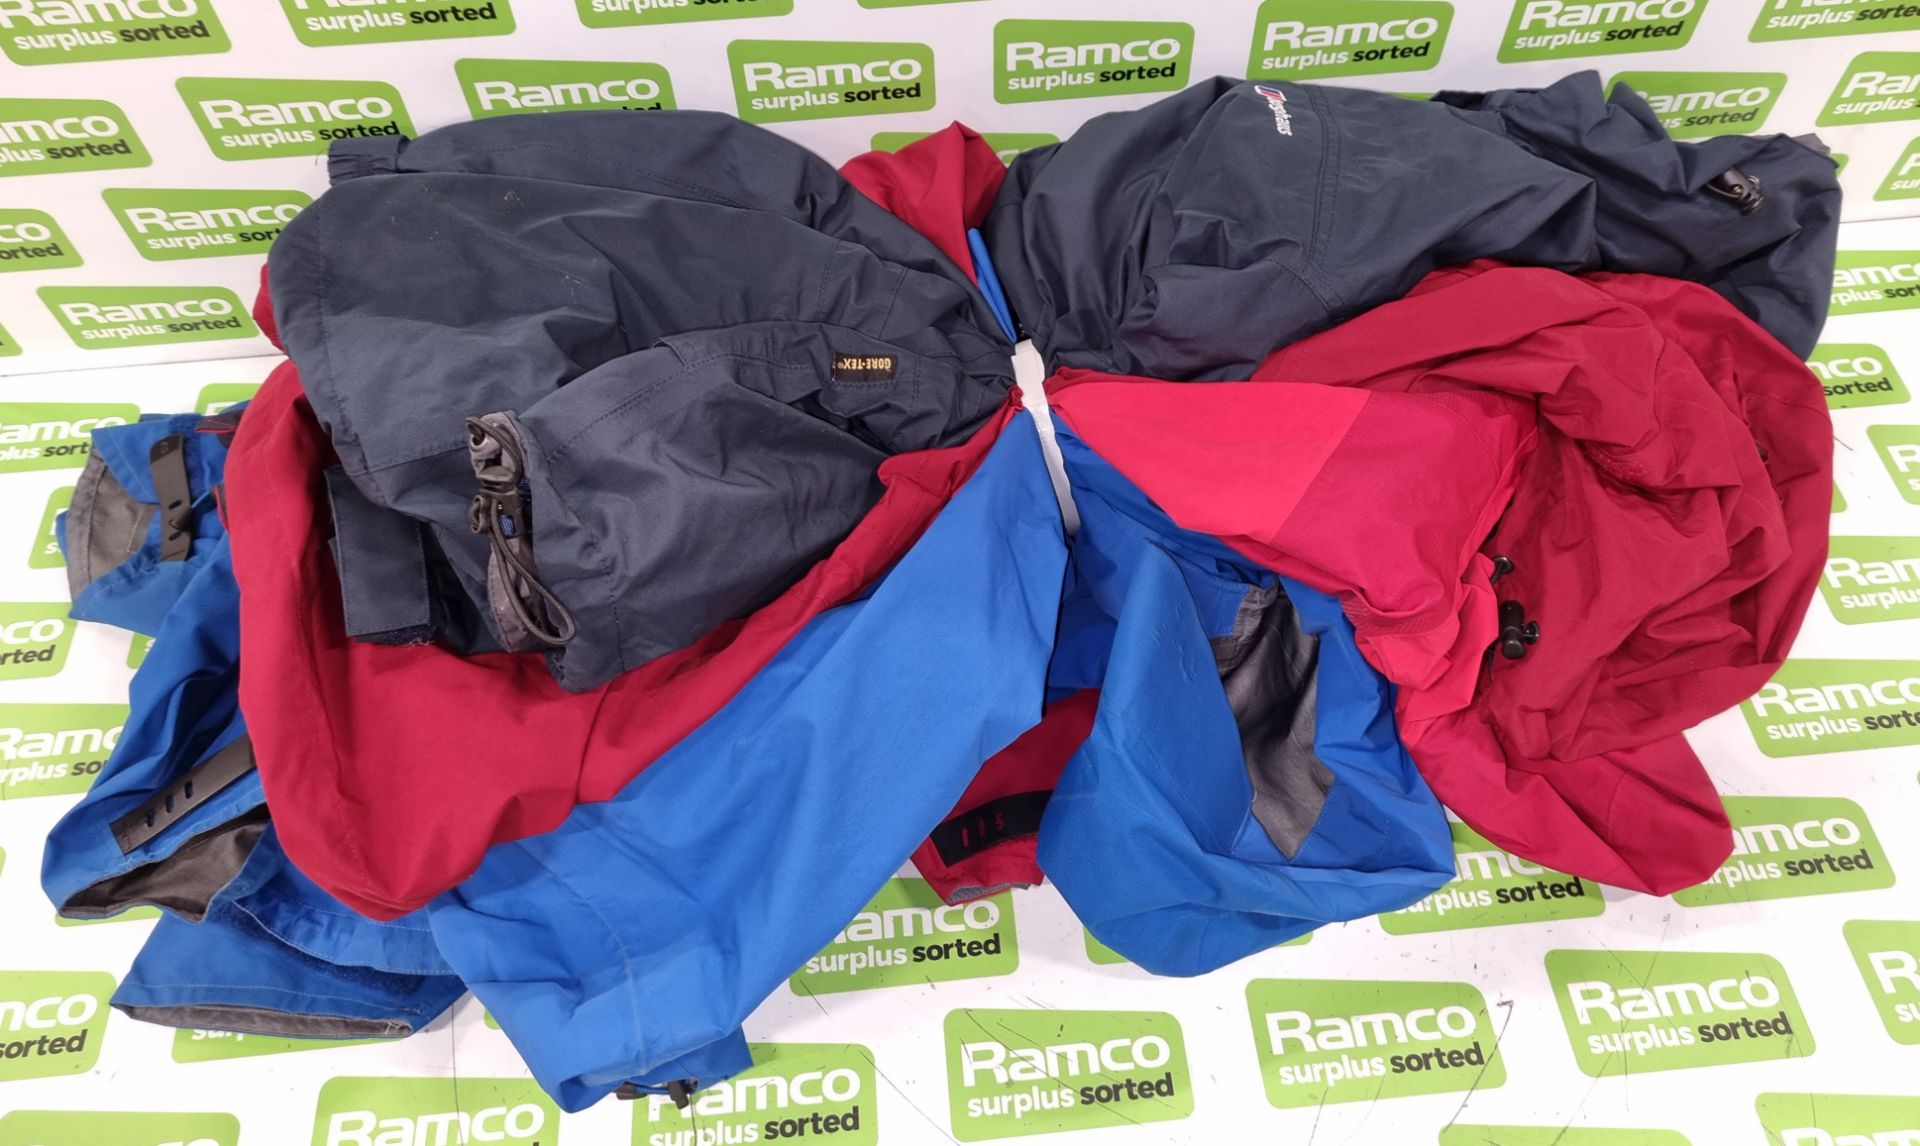 15x Hiking jackets with Gore-tex - Mountain & Rab - mixed grades and sizes - Image 5 of 5